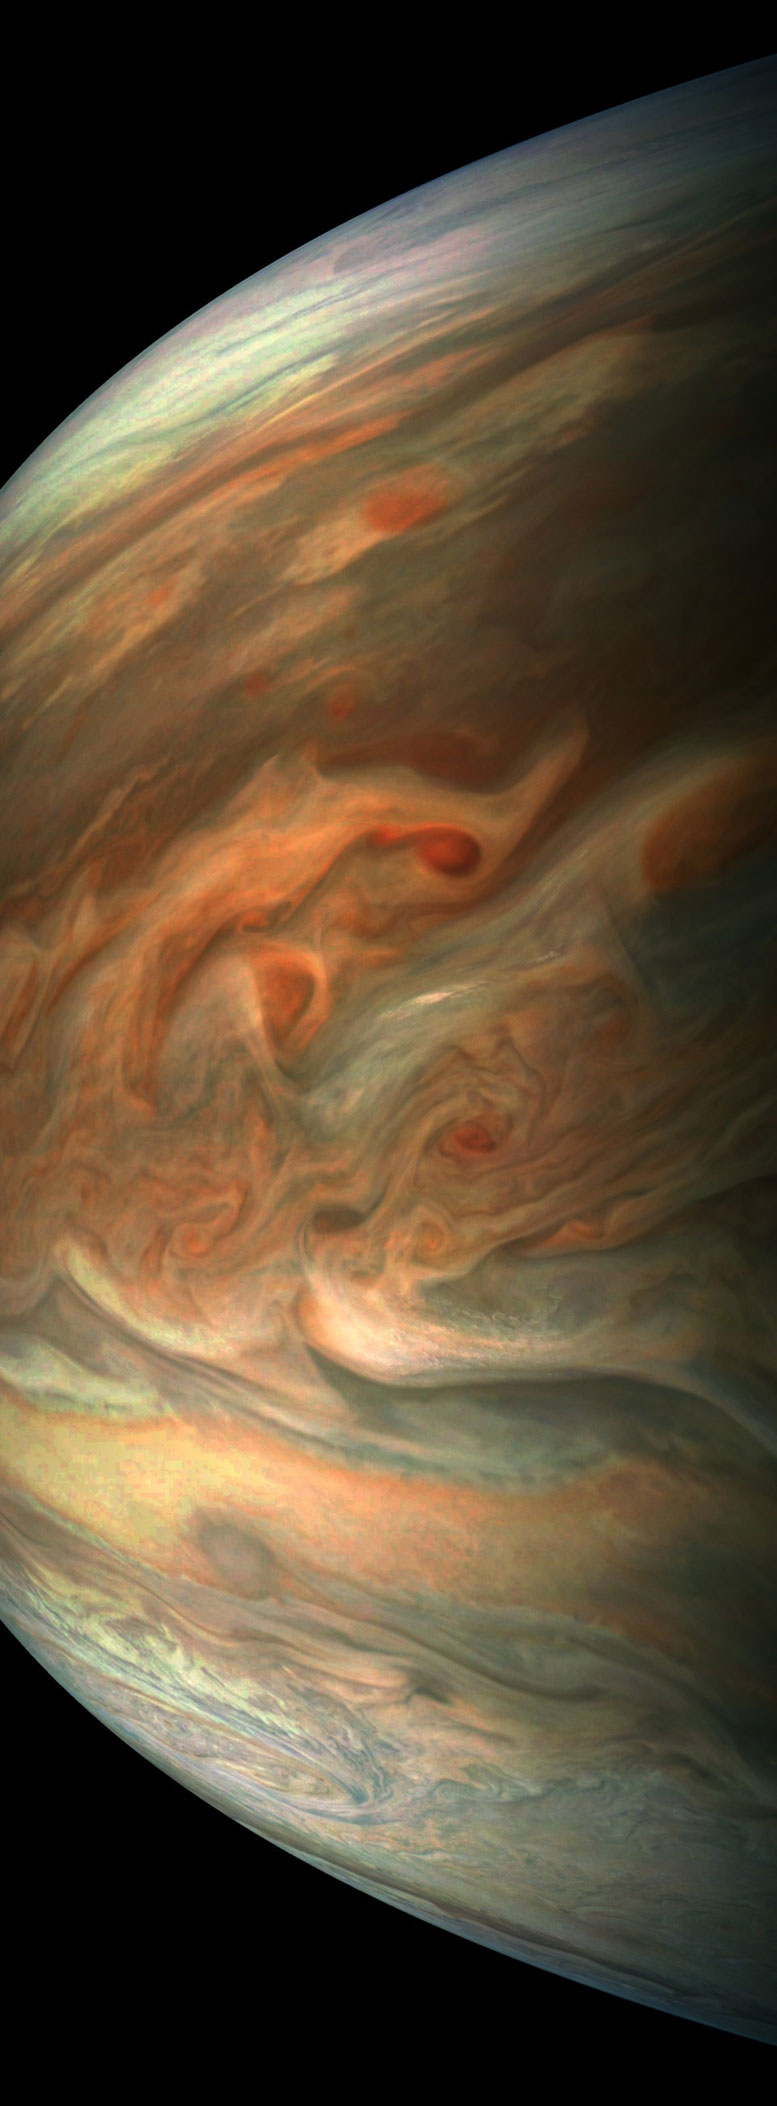 Juno Spacecraft Performs Its Eighth Flyby of Jupiter